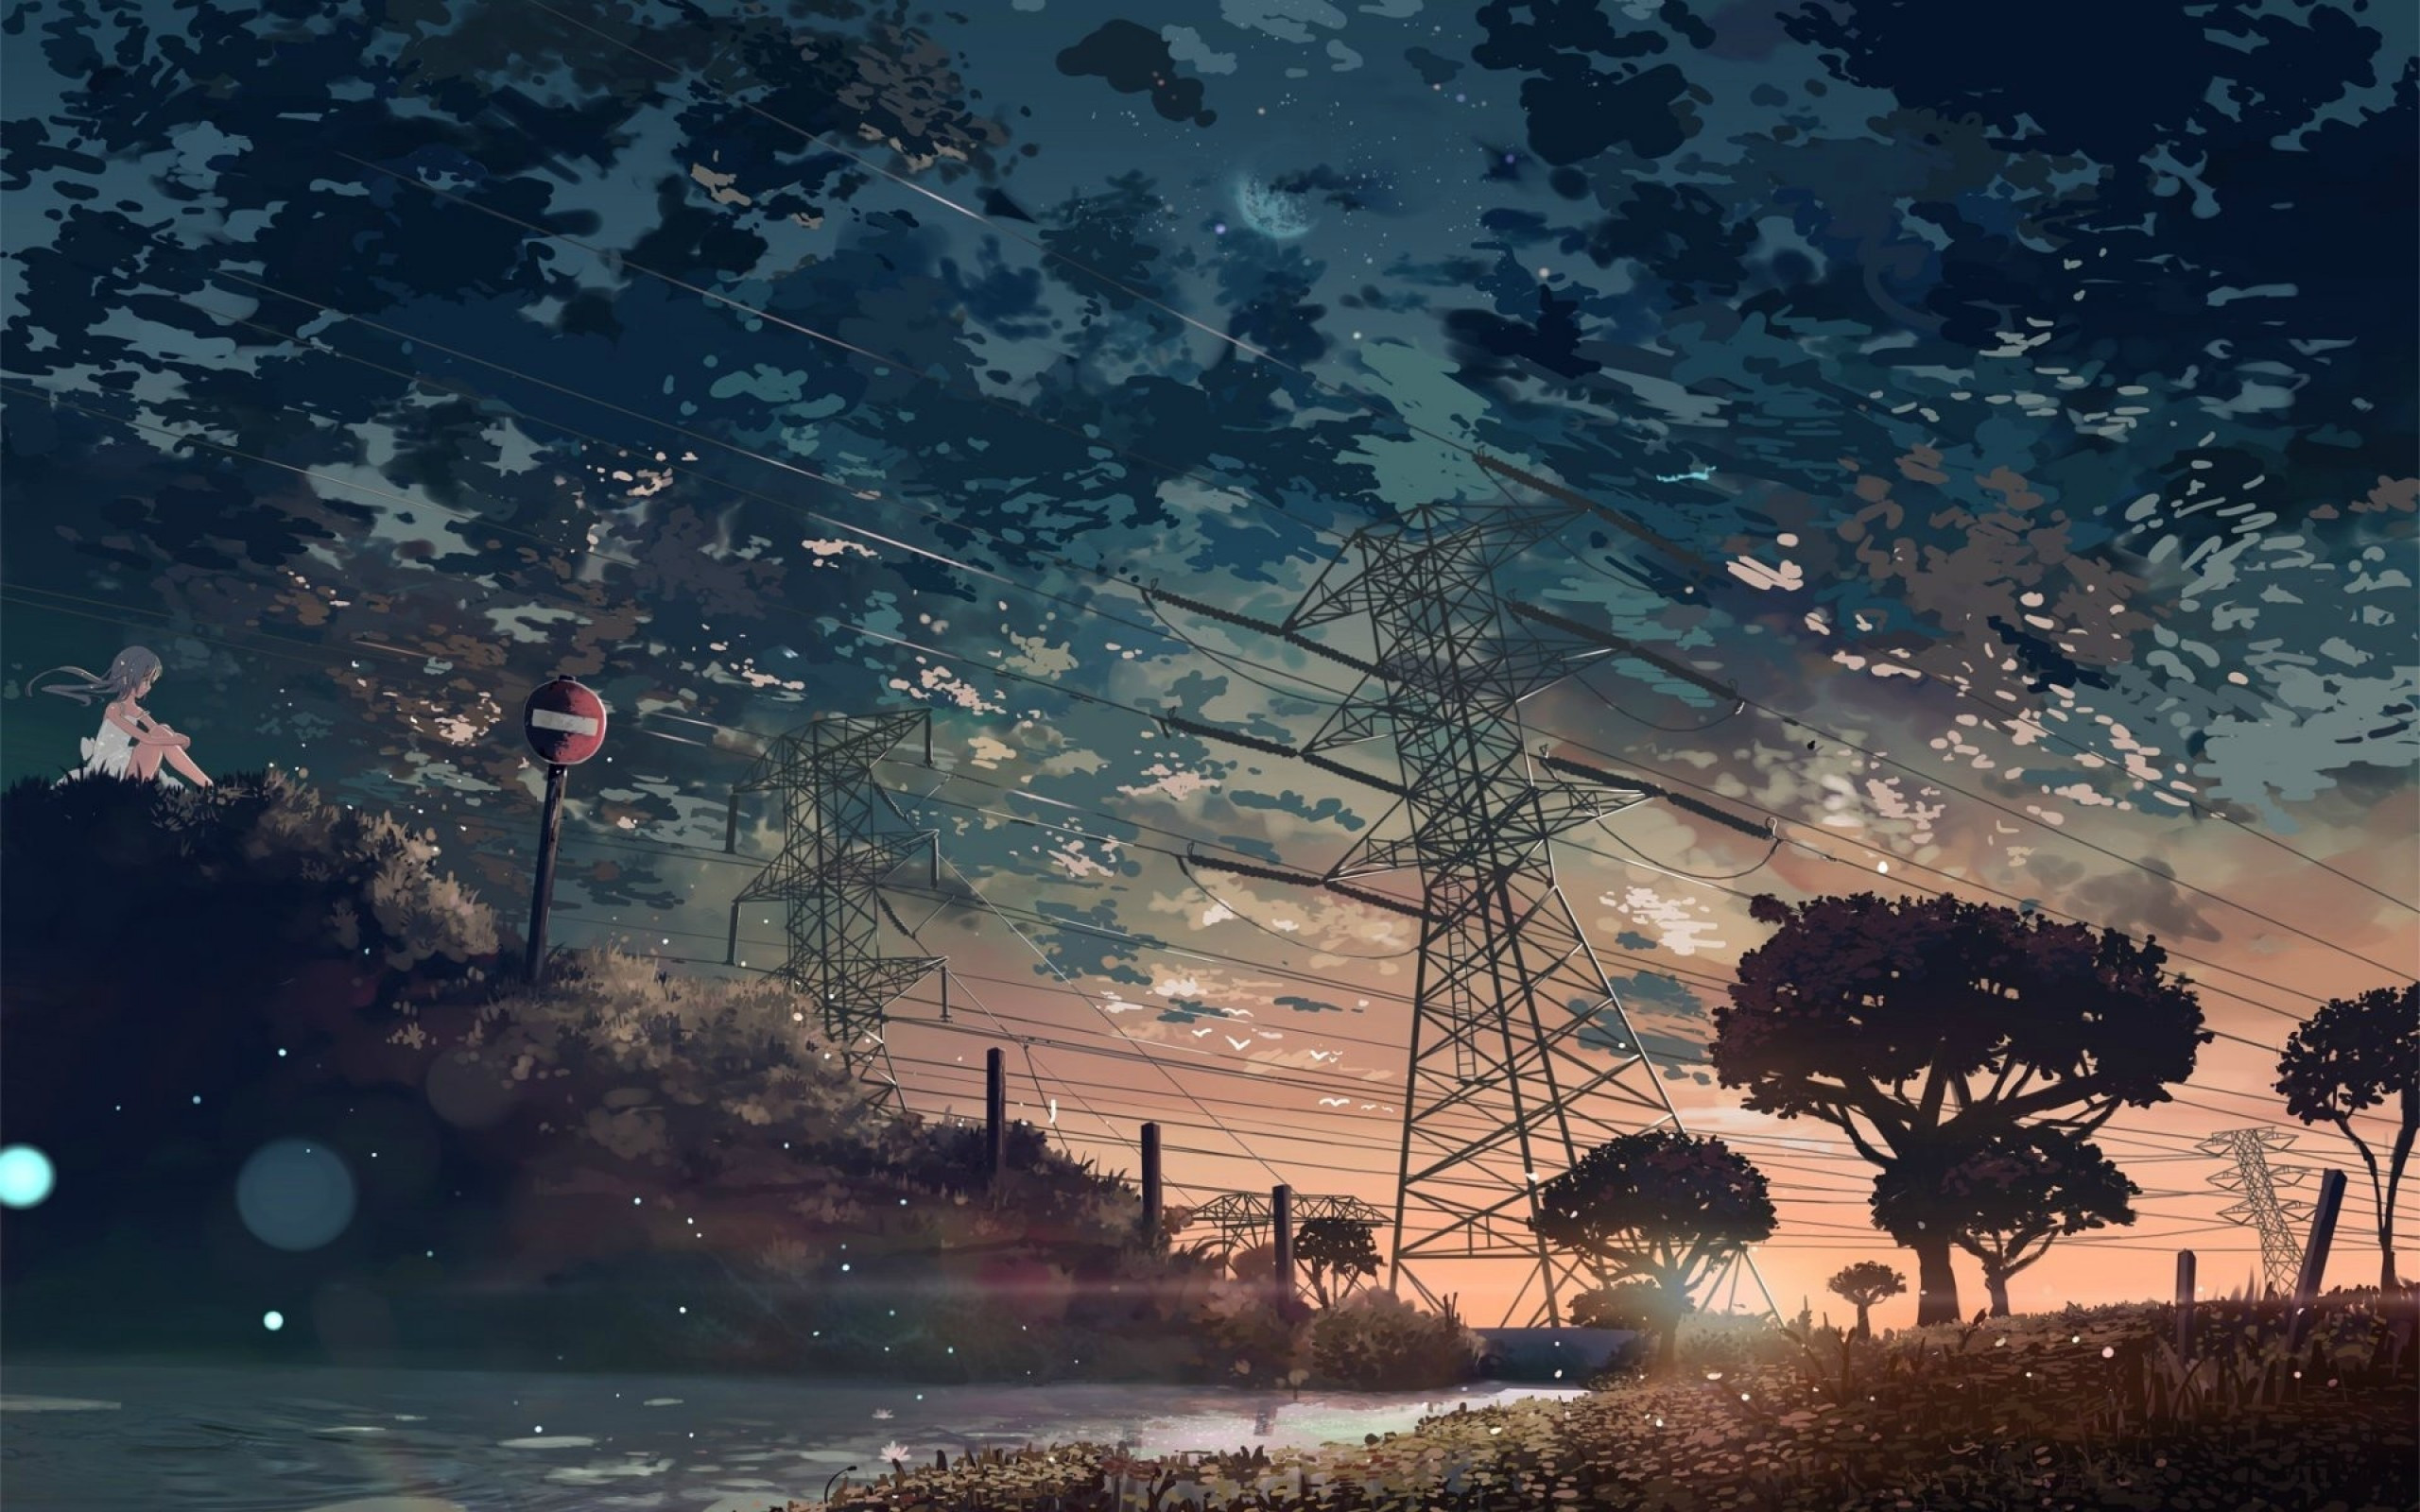 Download 2560x1600 Anime Landscape, Night, Scenic, Clouds, Trees Wallpaper for MacBook Pro 13 inch